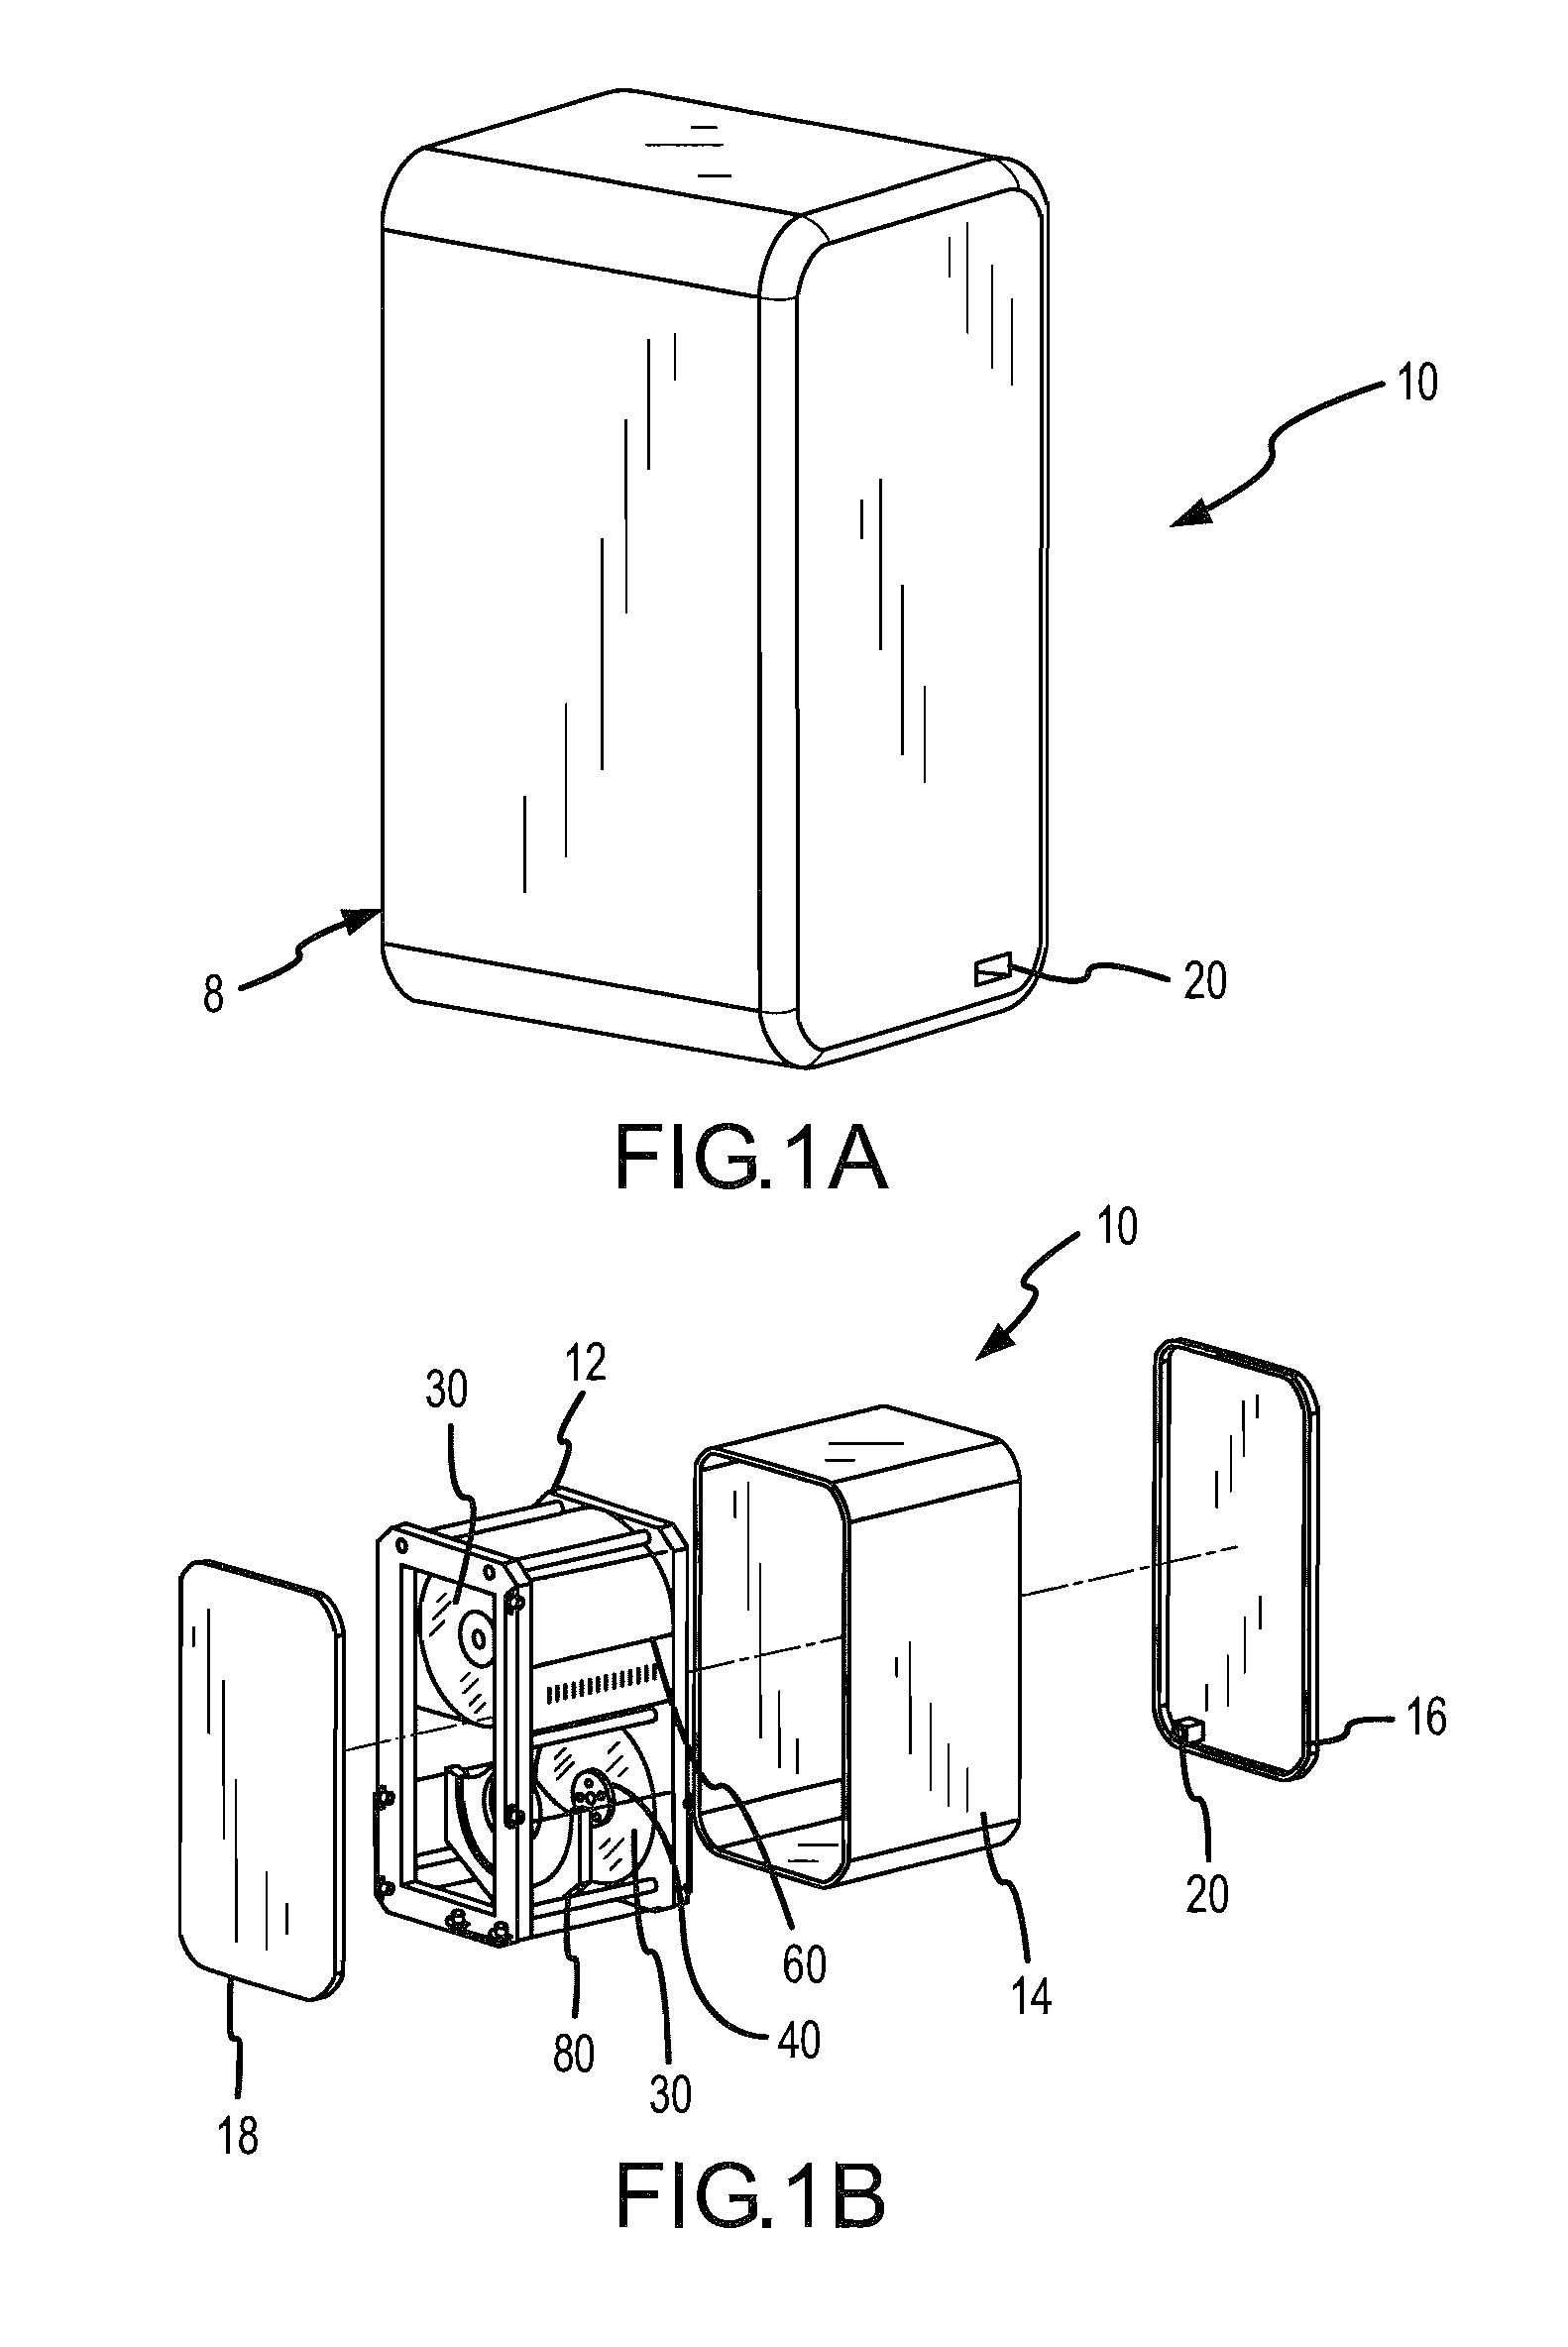 Data storage device with hard drive and interchangeable data storage disks